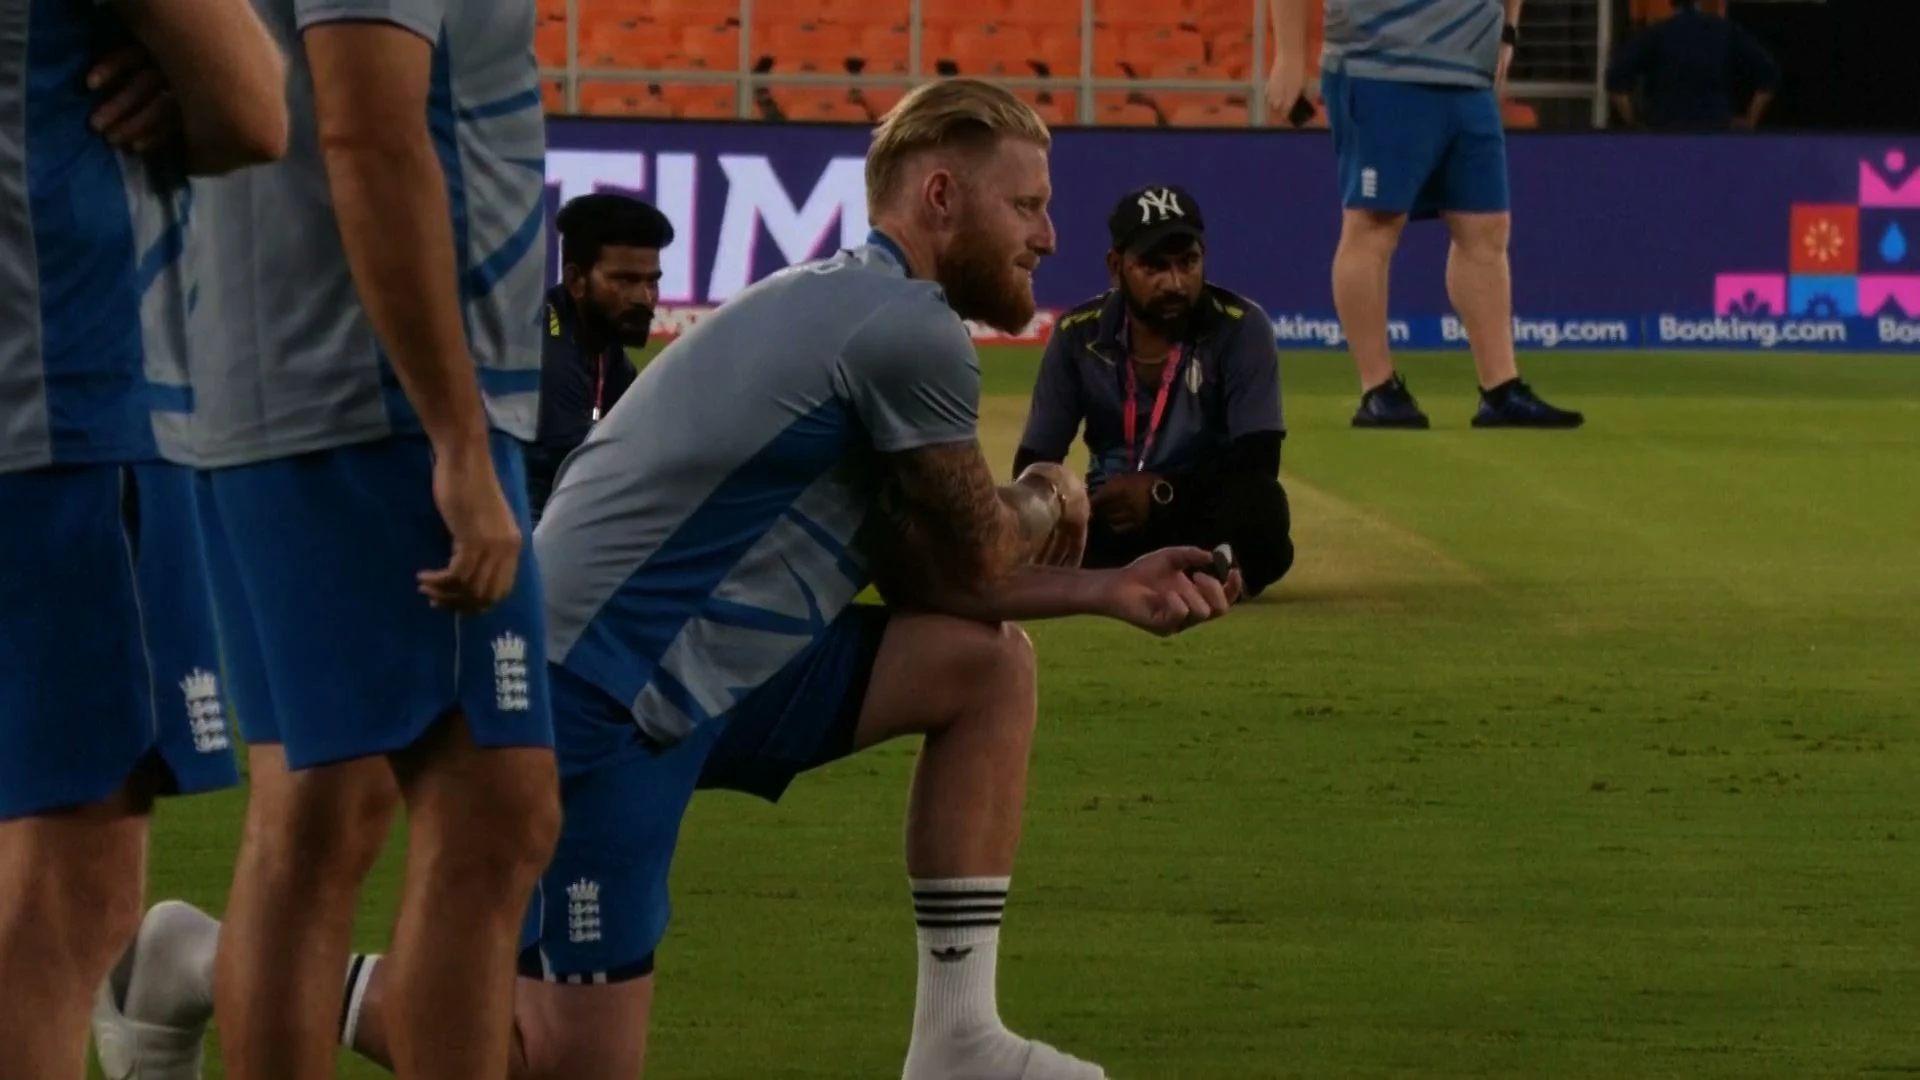 England sweating over Stokes injury | ICC Cricket World Cup - England v New Zealand